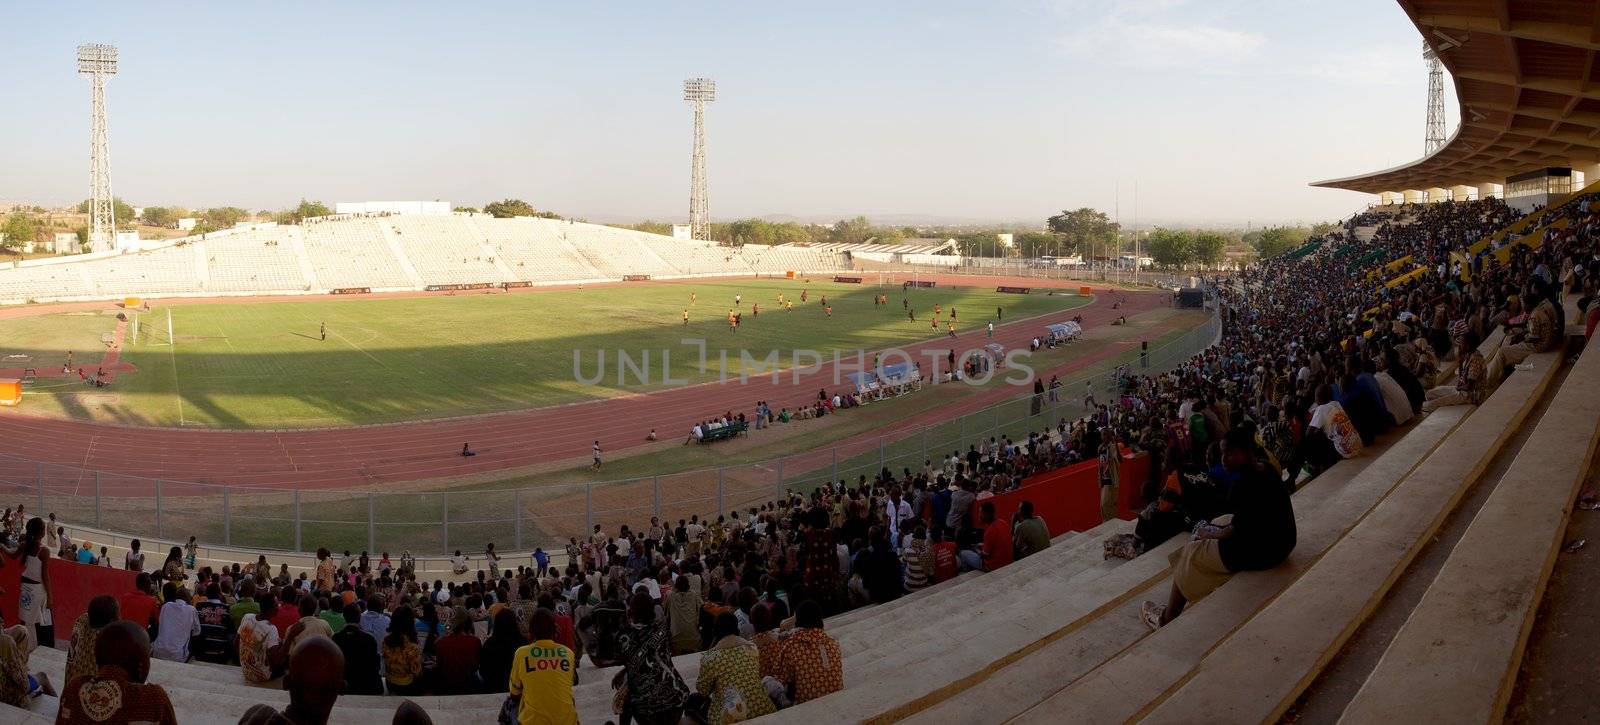 Shot from above a crowd watching a football game into the stadium of Bamako in Mali.